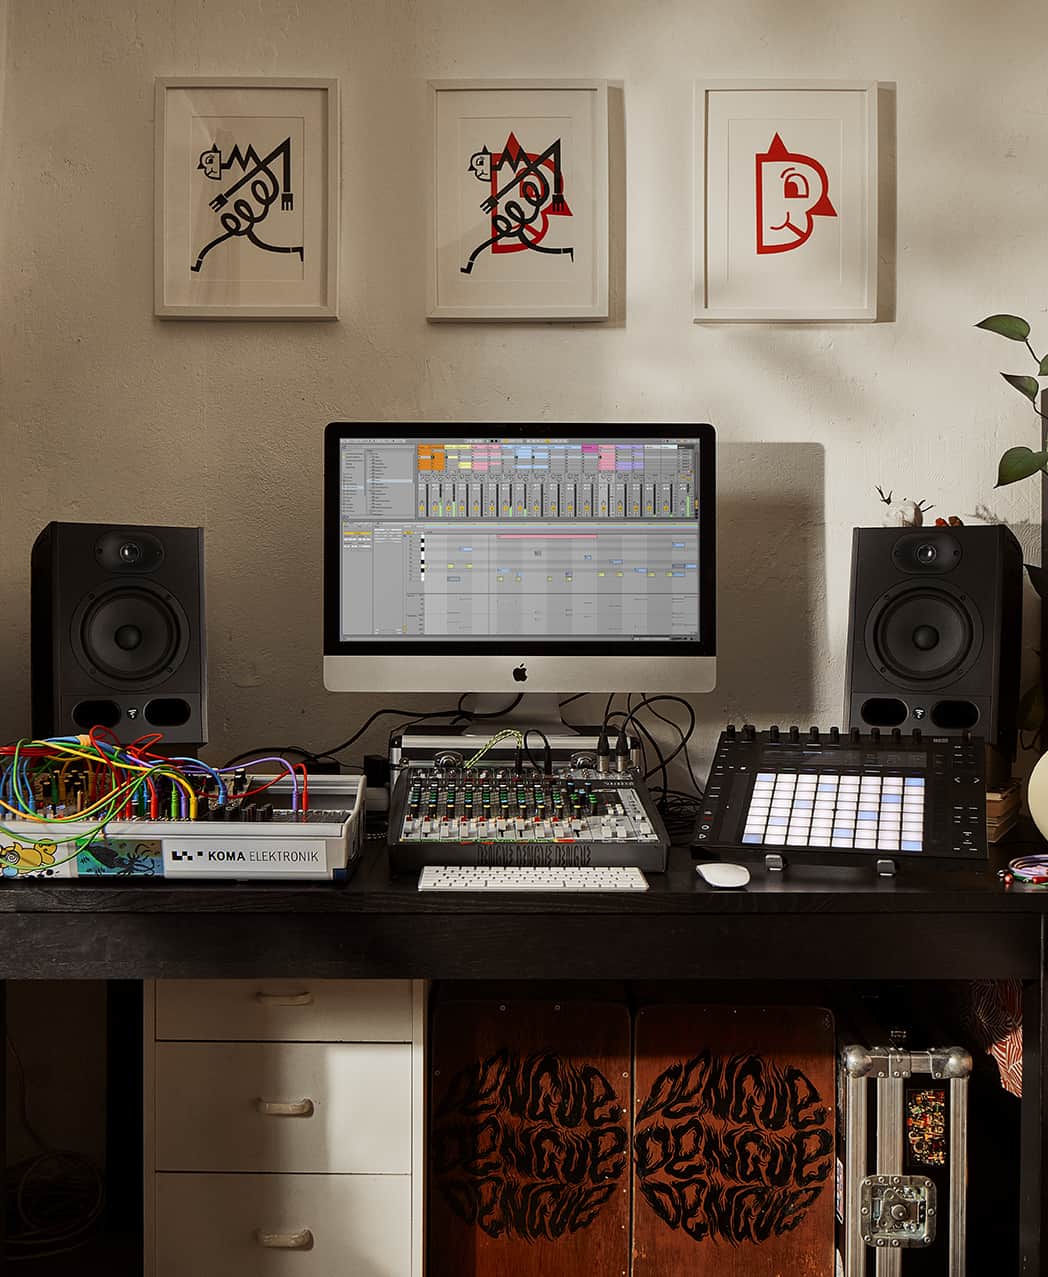 Ableton Live 11 is Happening